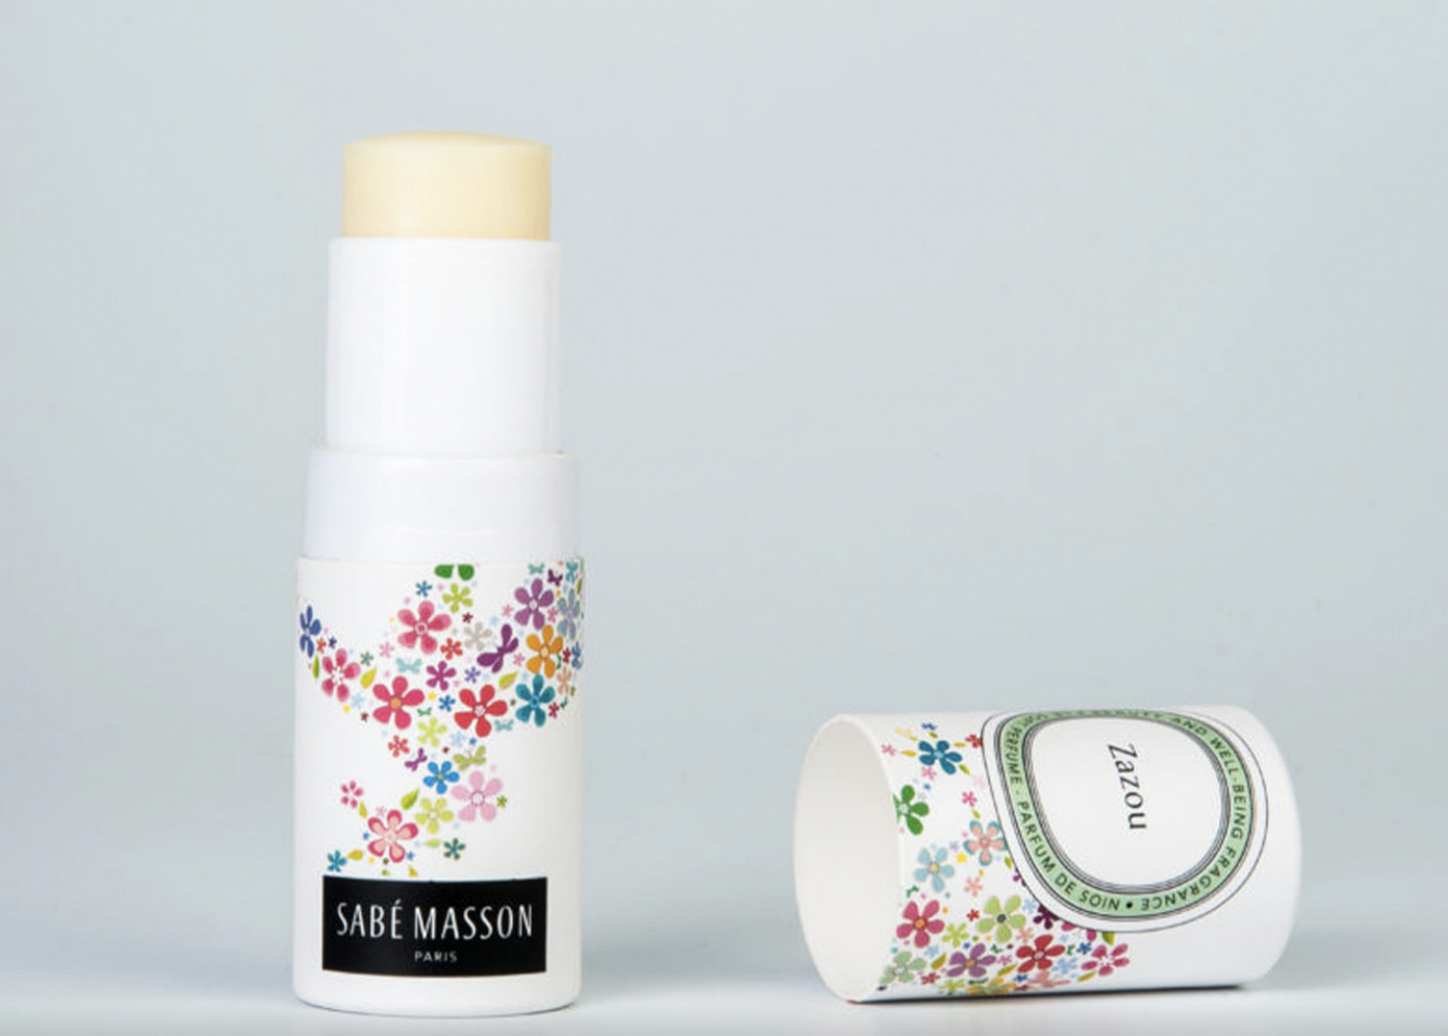 Sabé Masson, Niche Perfume Brand by Sephora Founders, Under New Ownership